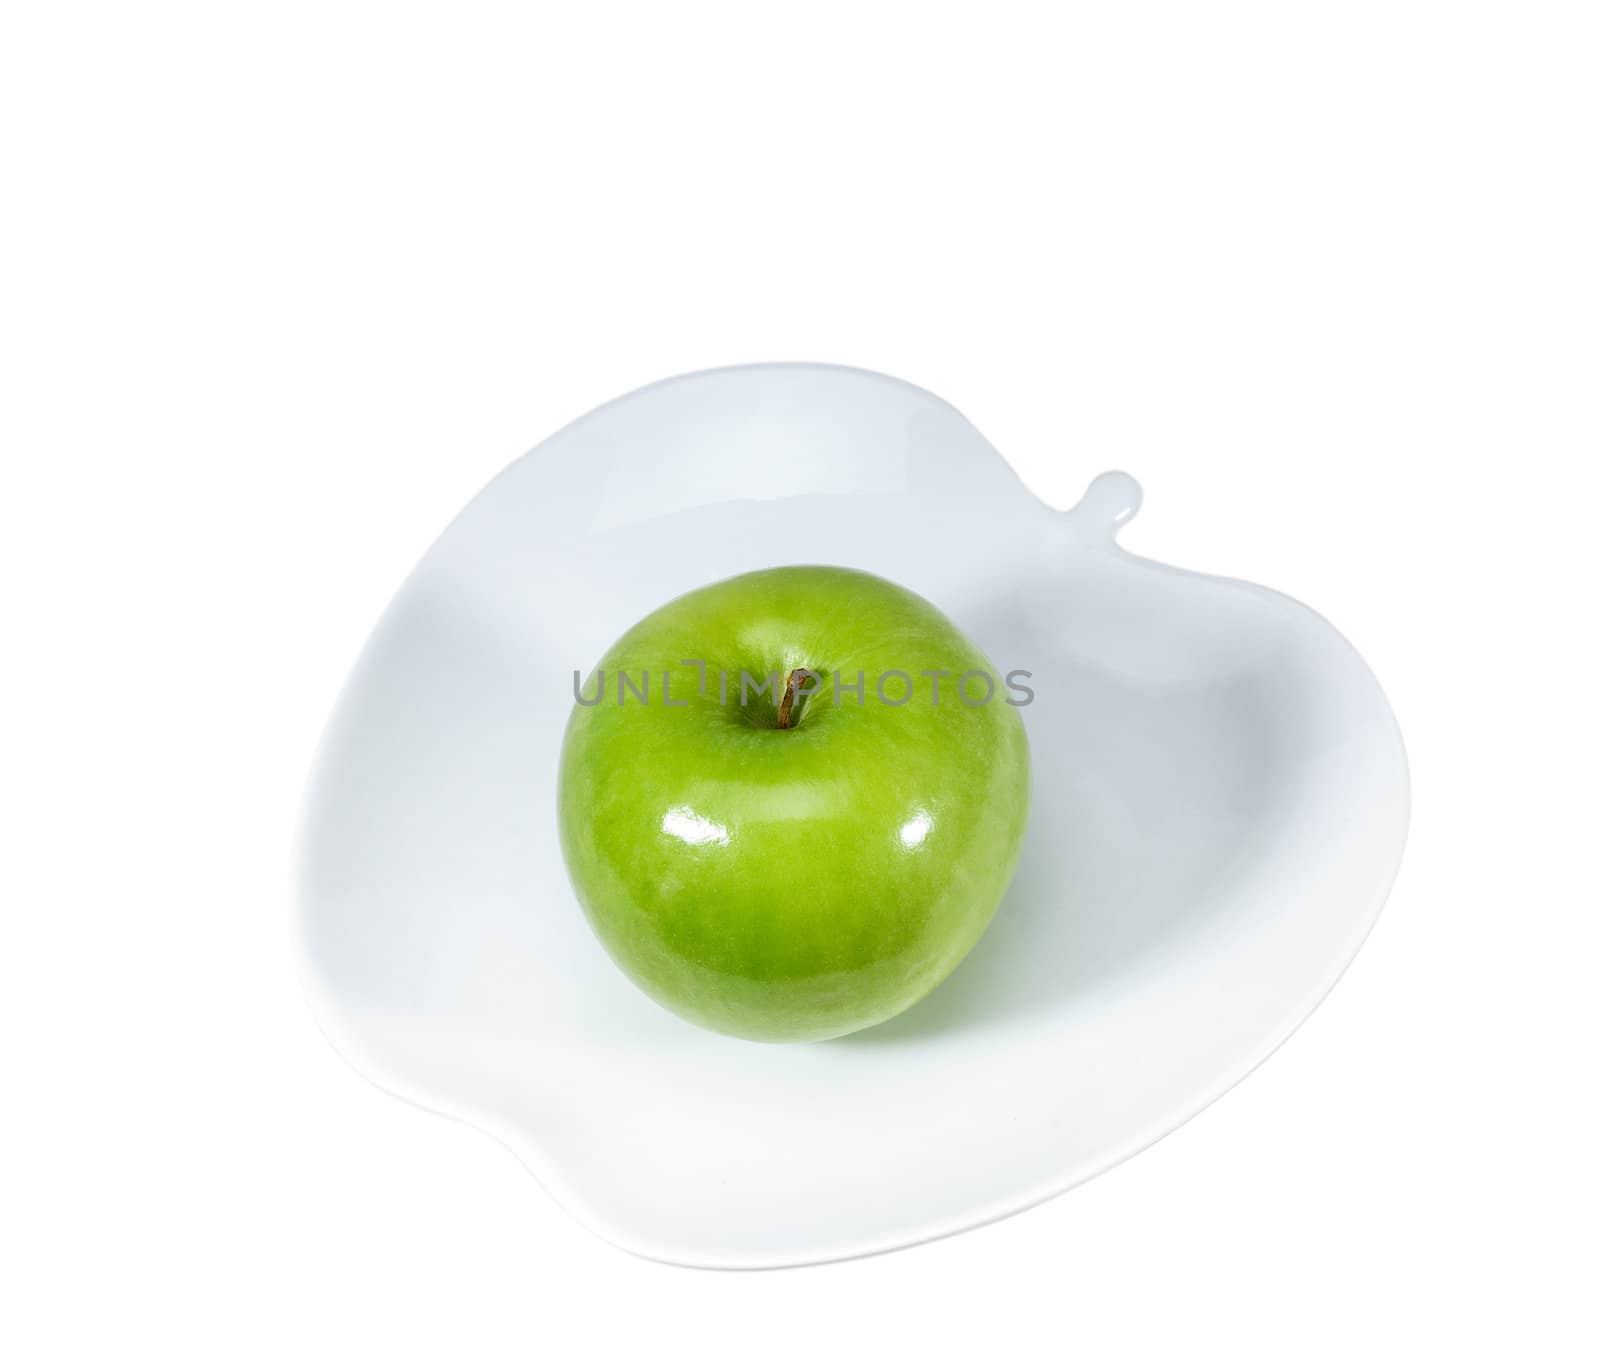 green apple on a apple shaped dish isolated over white